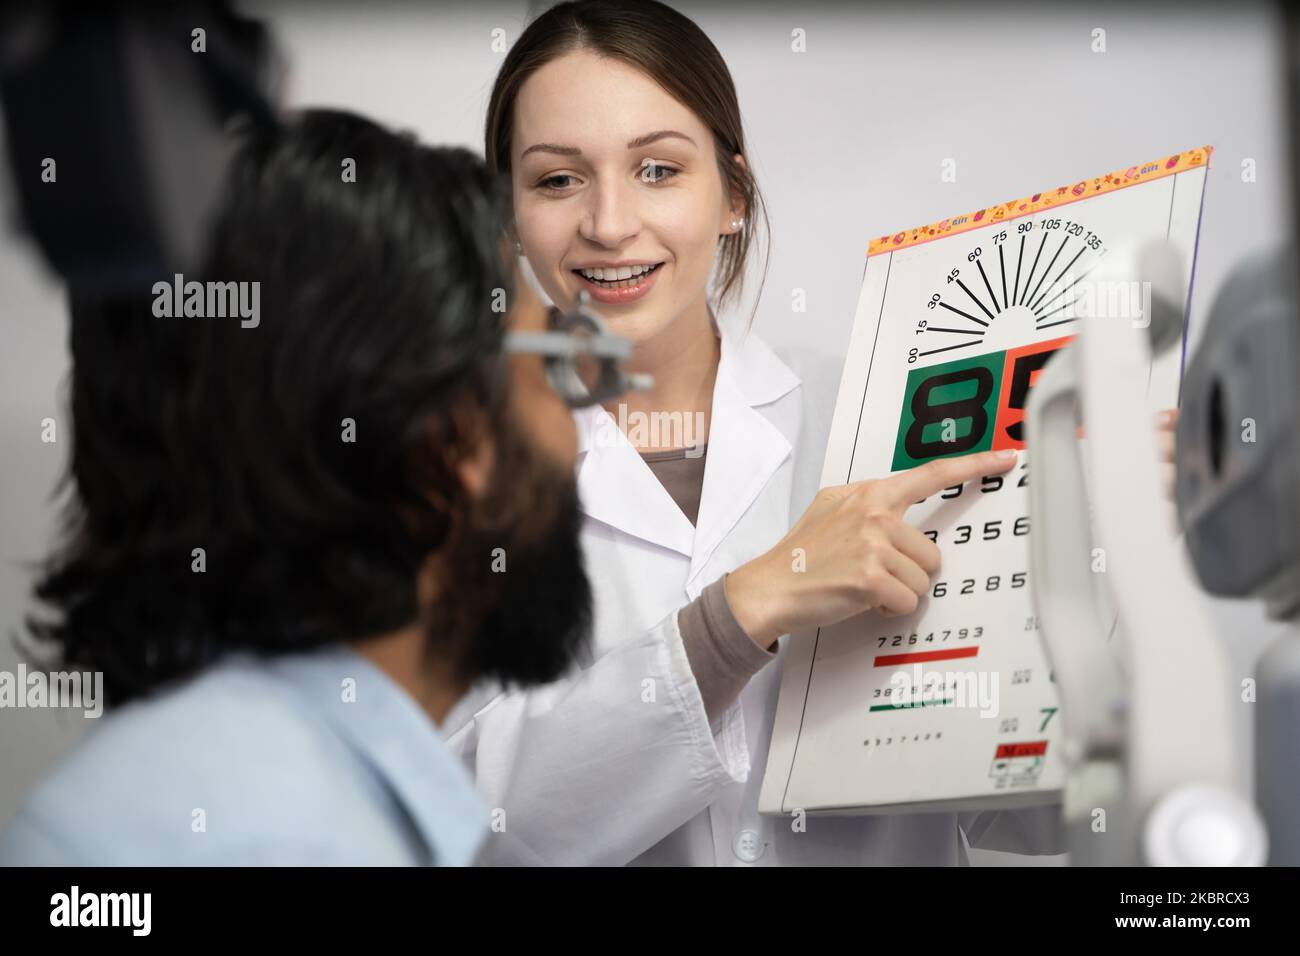 An eye doctor examines a male patient in a clinic with modern equipment. Stock Photo